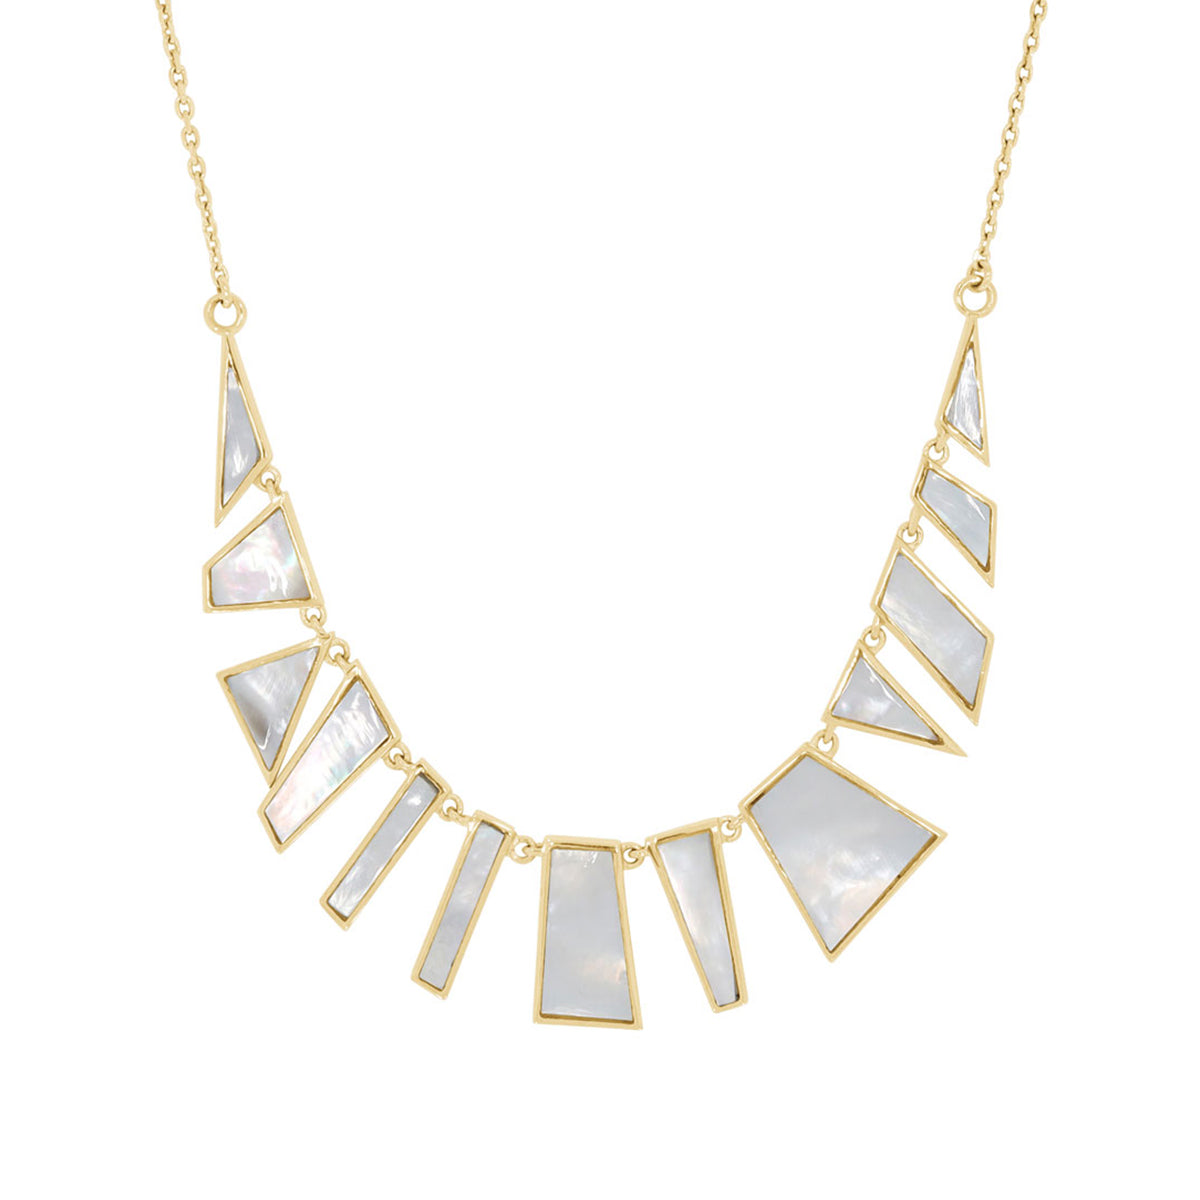 Metier by tomfoolery Tesserae Mother of pearl midi necklace